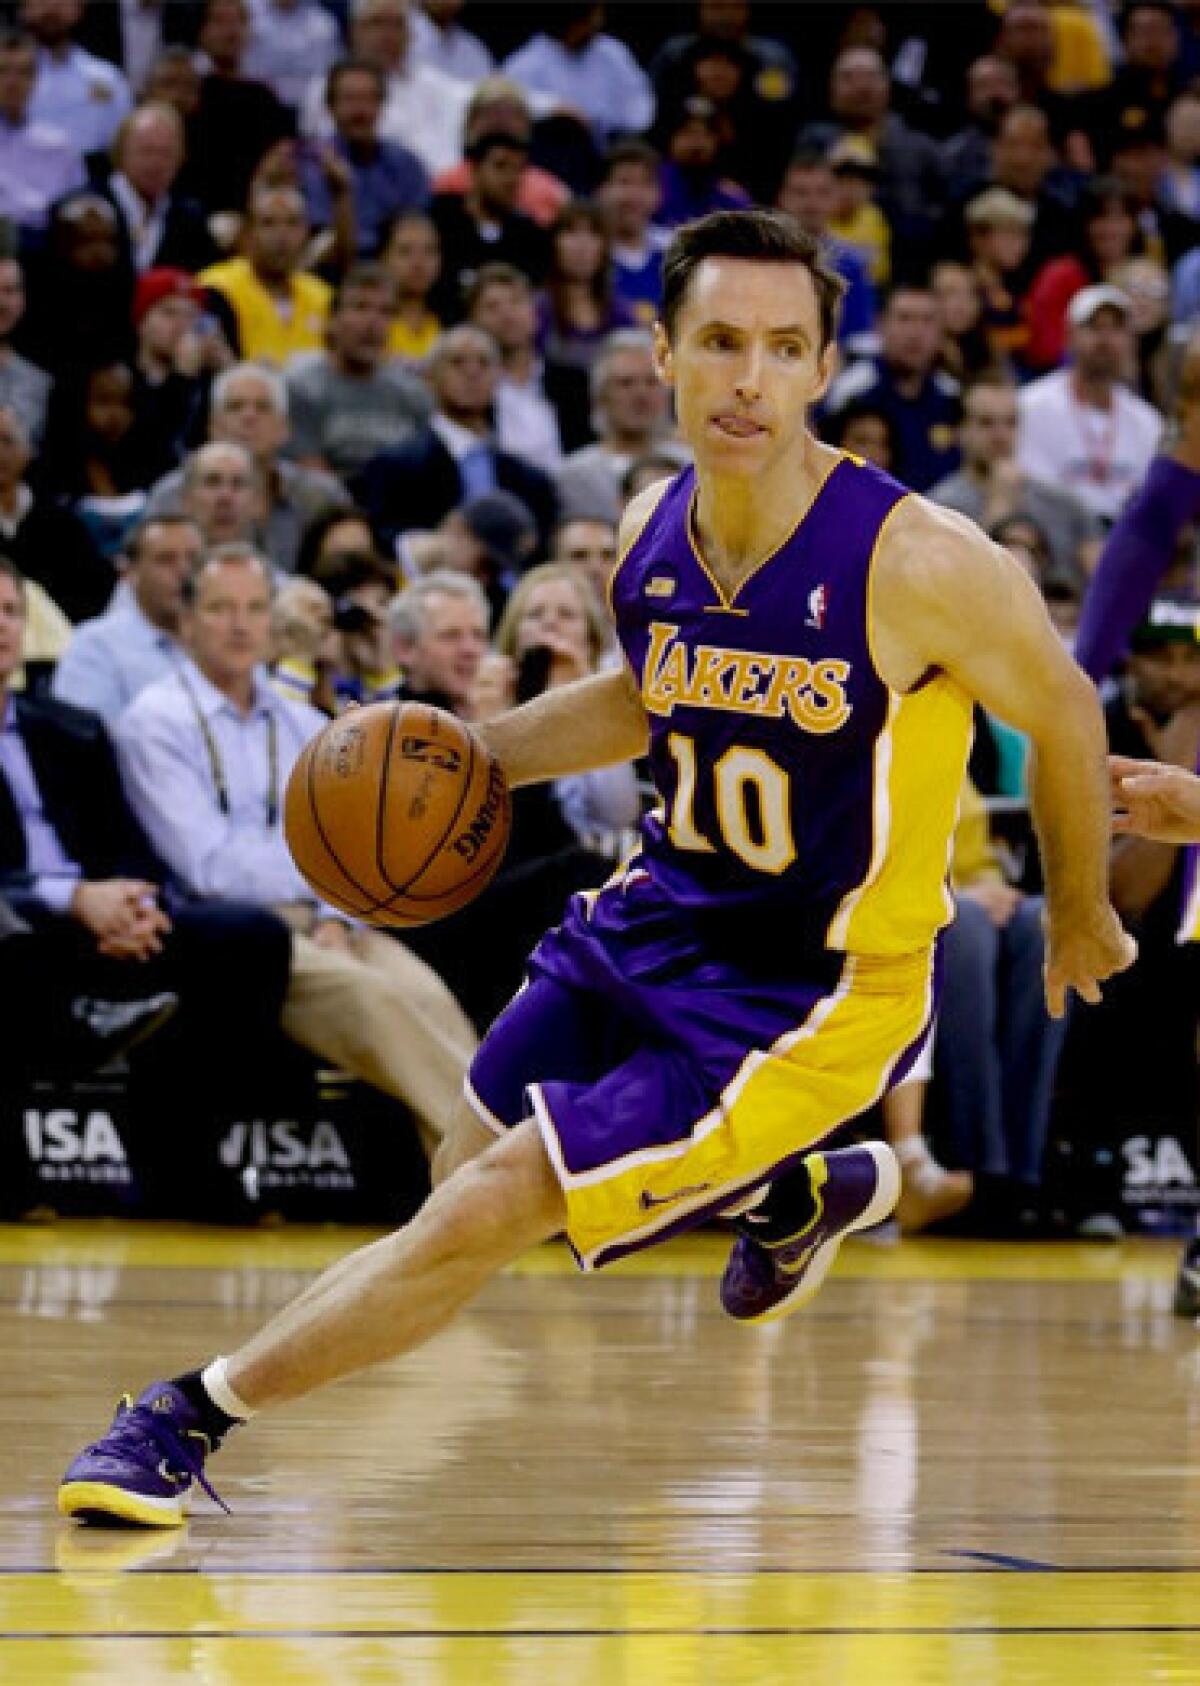 Lakers point guard Steve Nash averaged 12.7 points and 6.7 assists in 50 games this season.